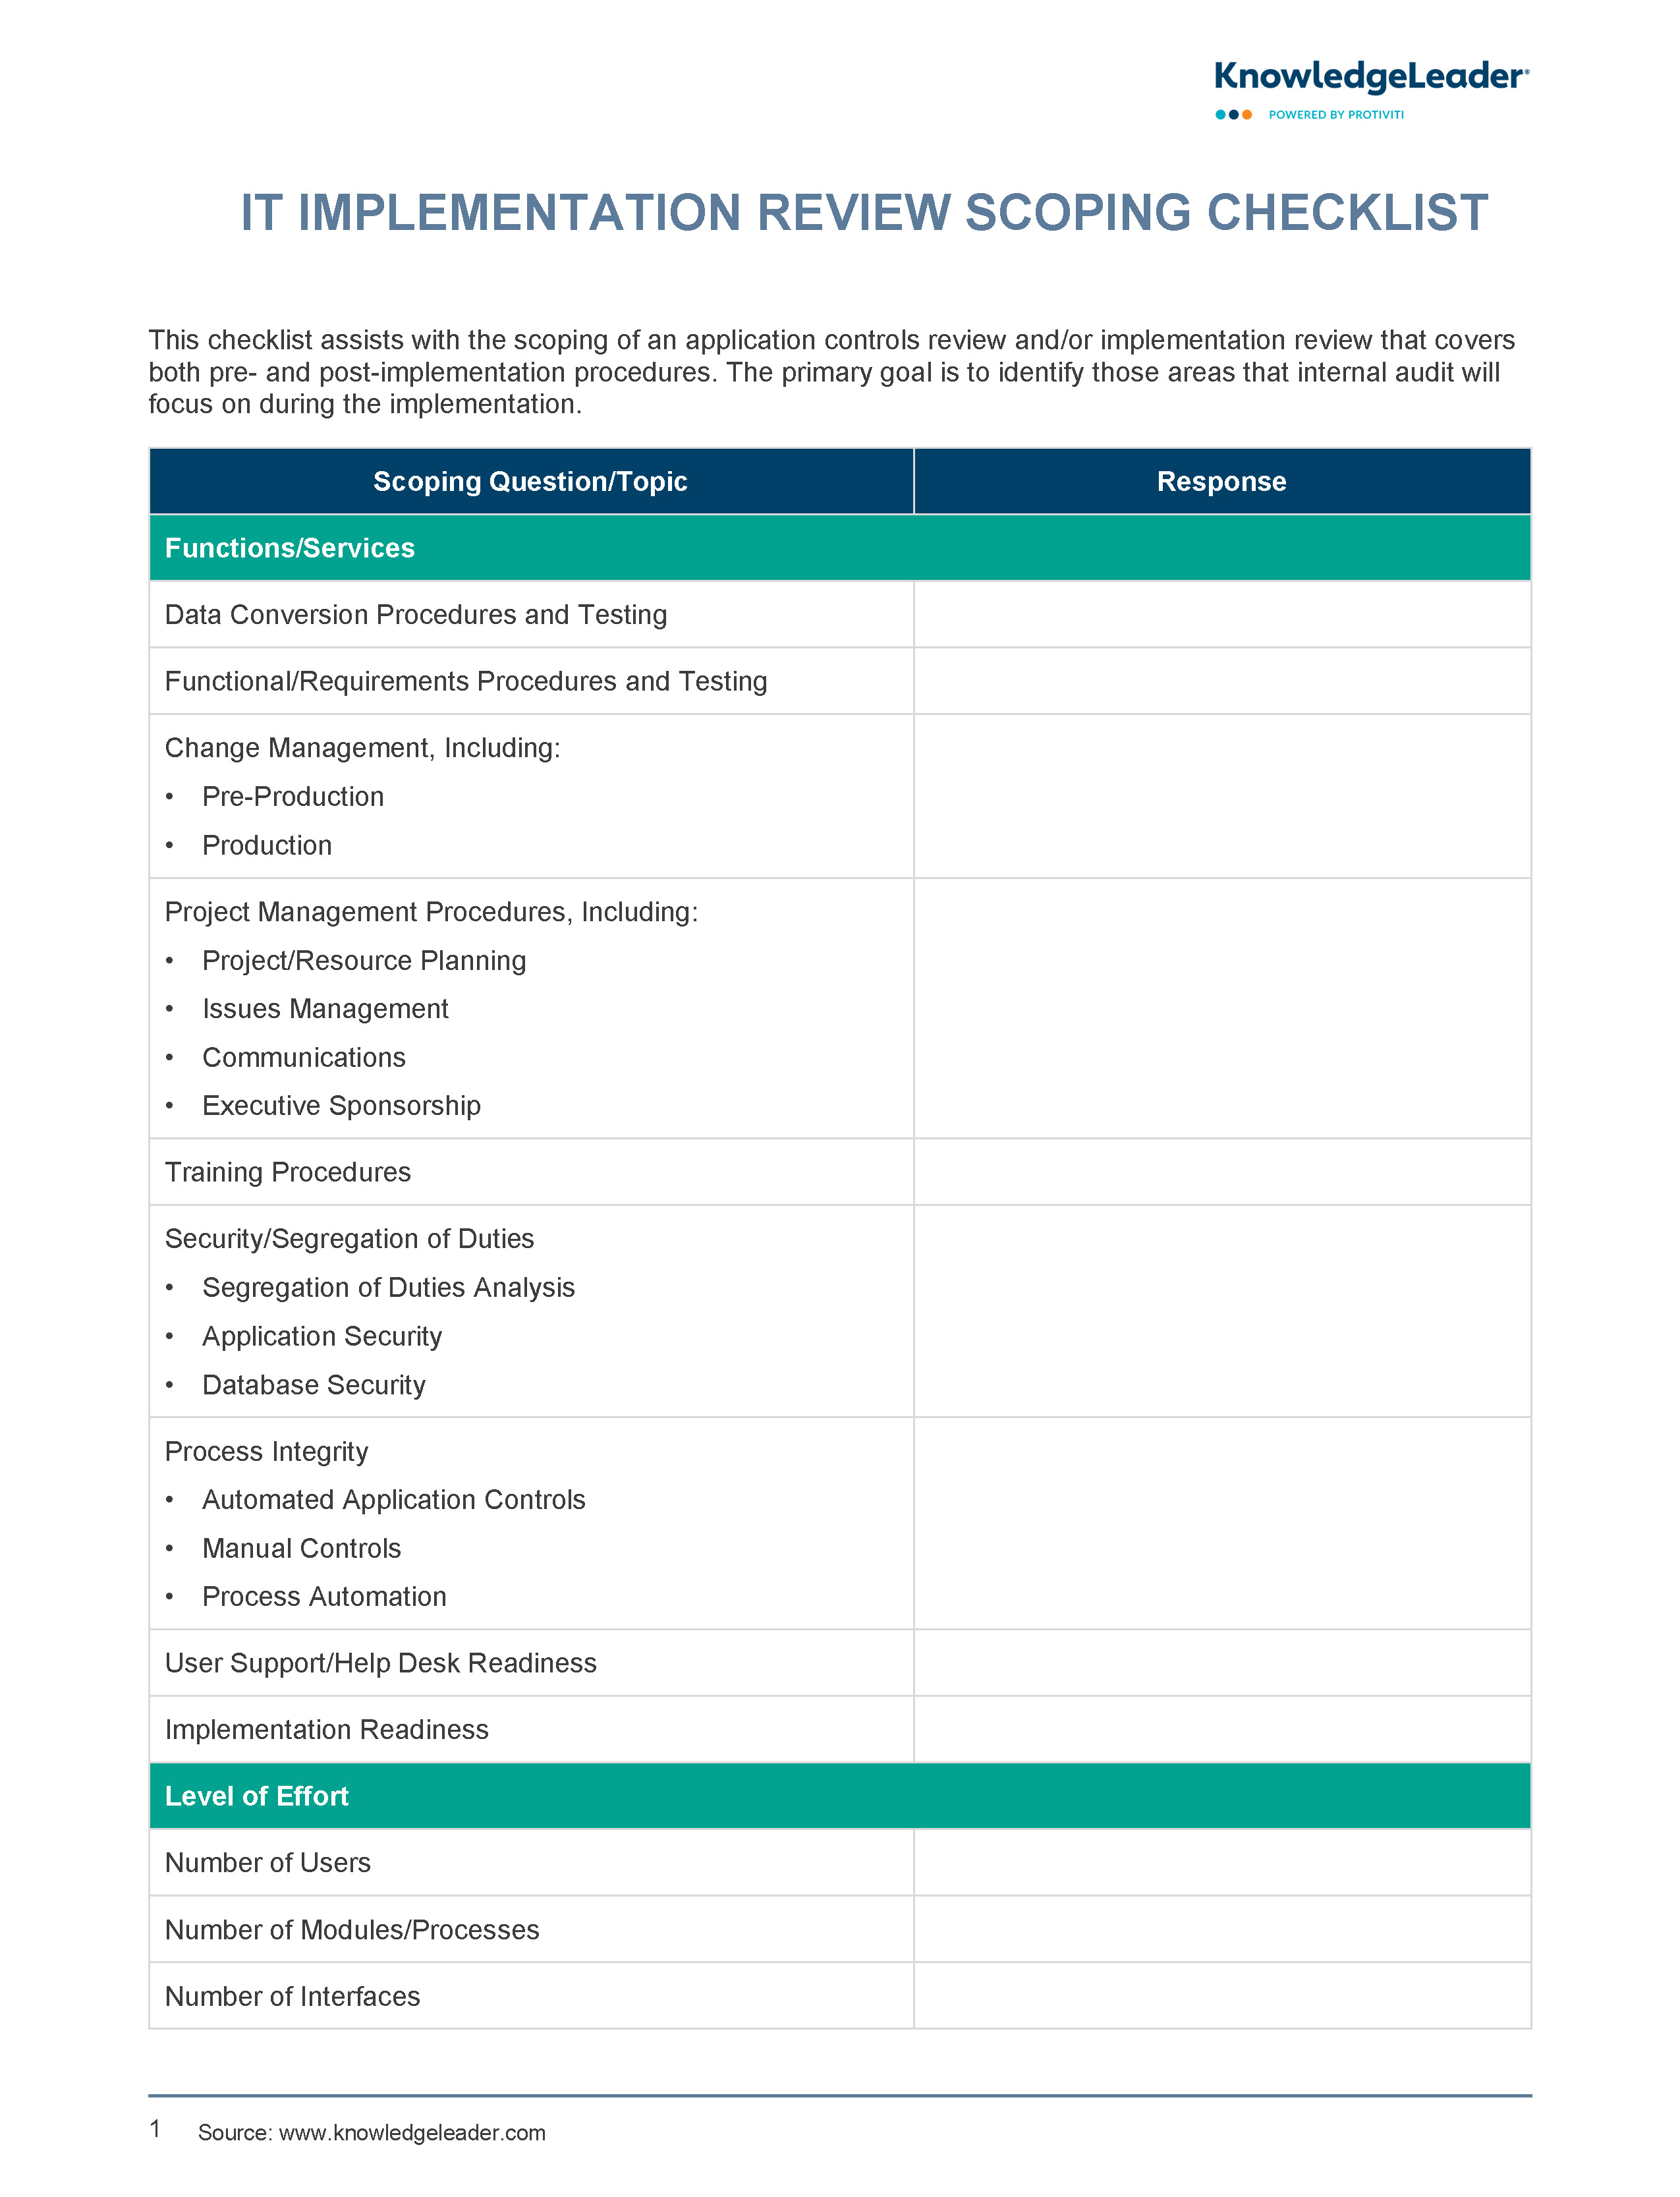 Screenshot of the first page of IT Implementation Review Scoping Checklist